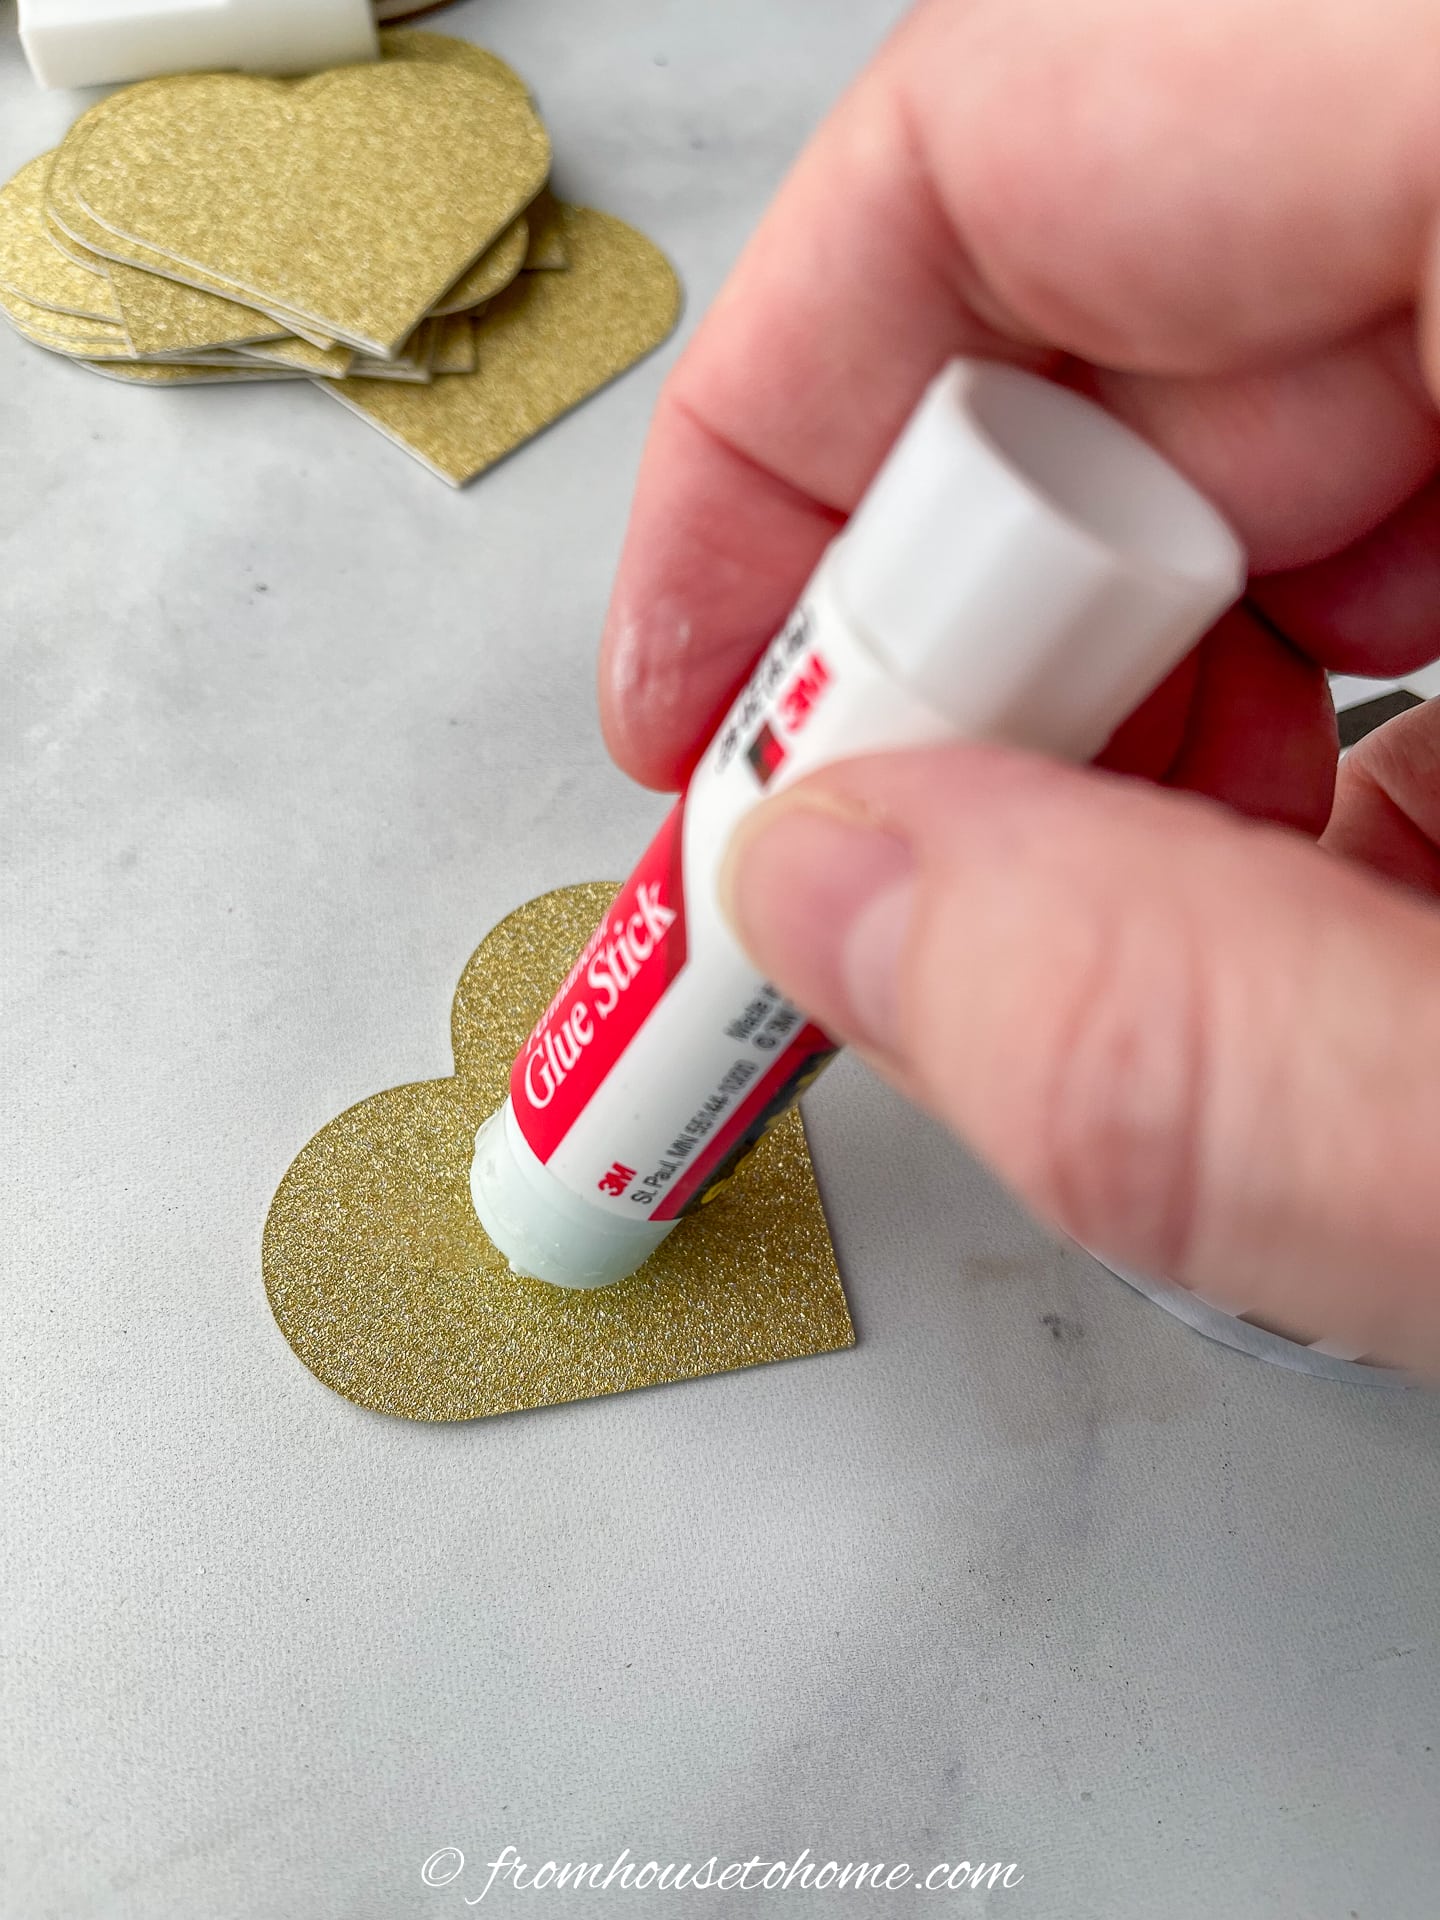 A person is using a glue stick to put glue on a gold heart